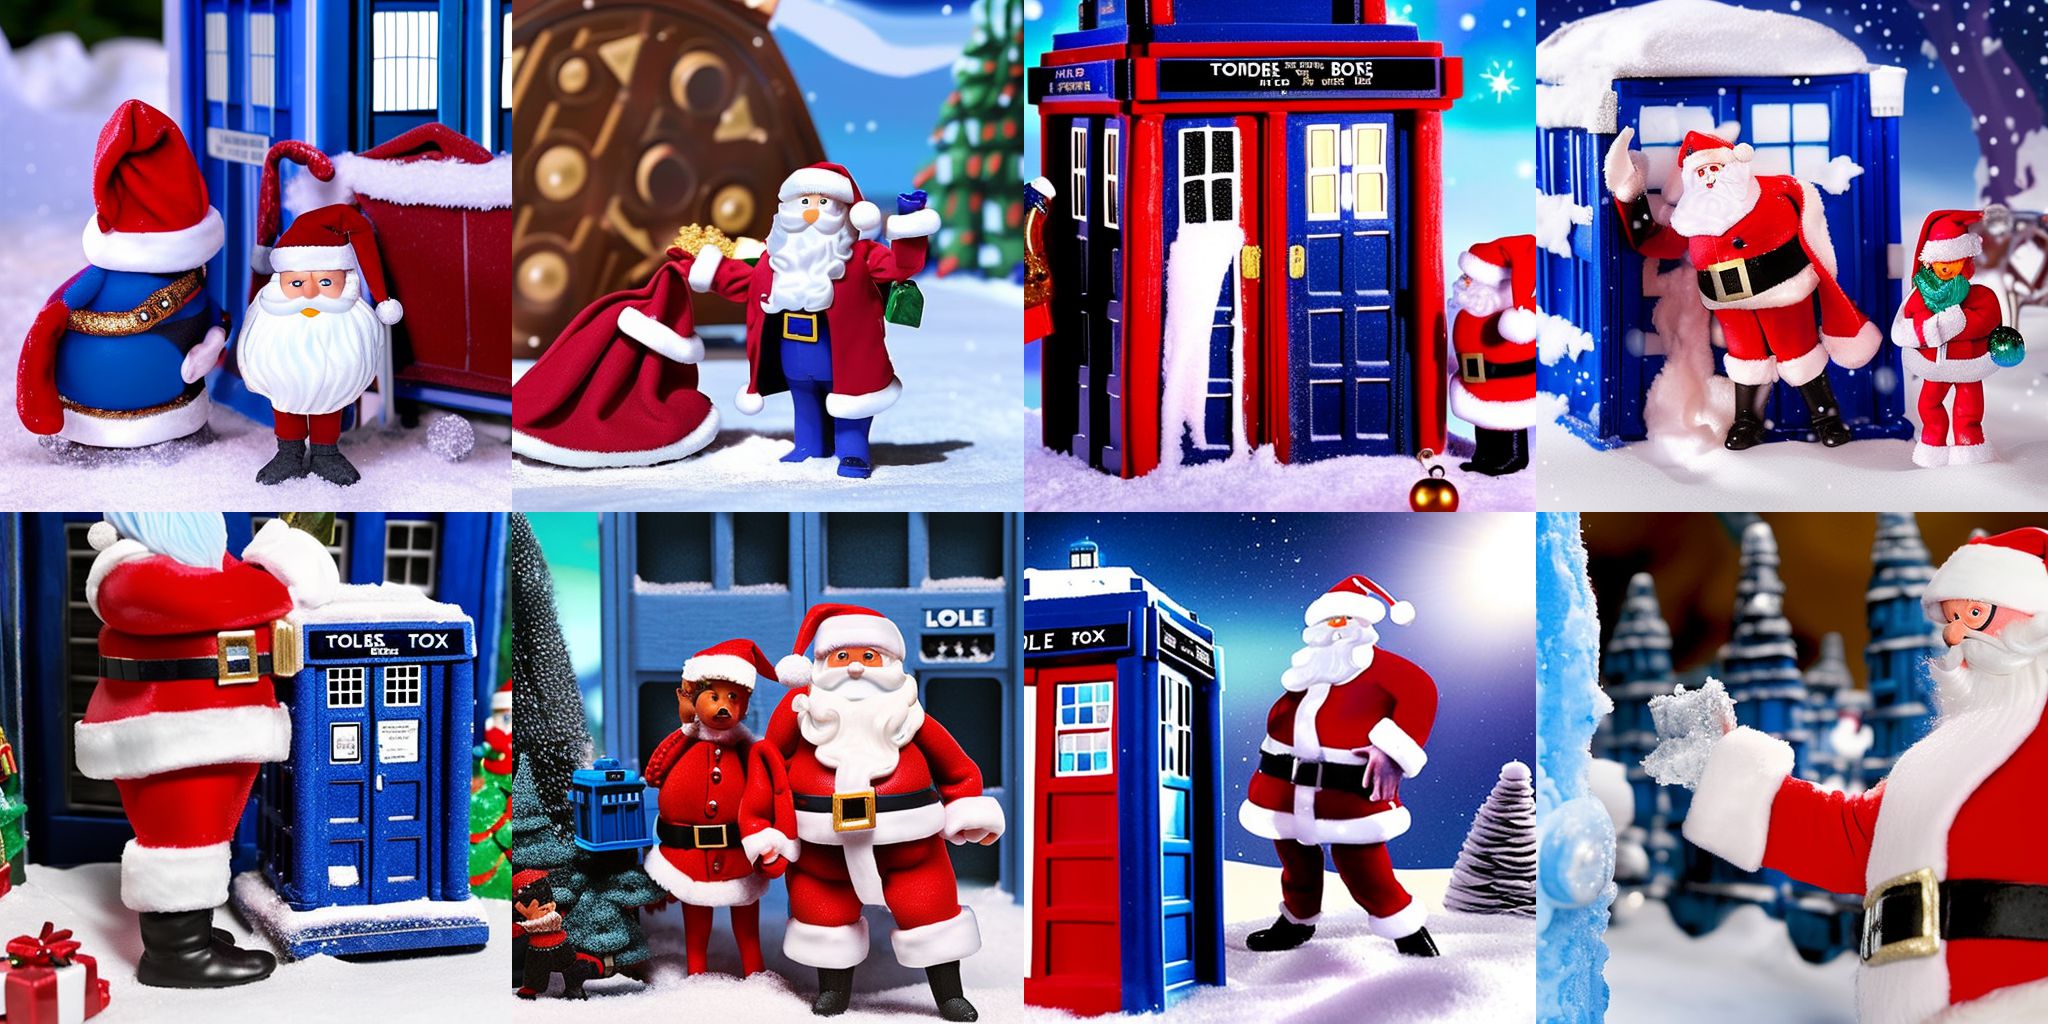 grid-0167-3362370631-A_TARDIS_in_the_snow_with_Santa_ClaymationXmas,_very_detailed,_clean,_high_quality,_sharp_image.jpg